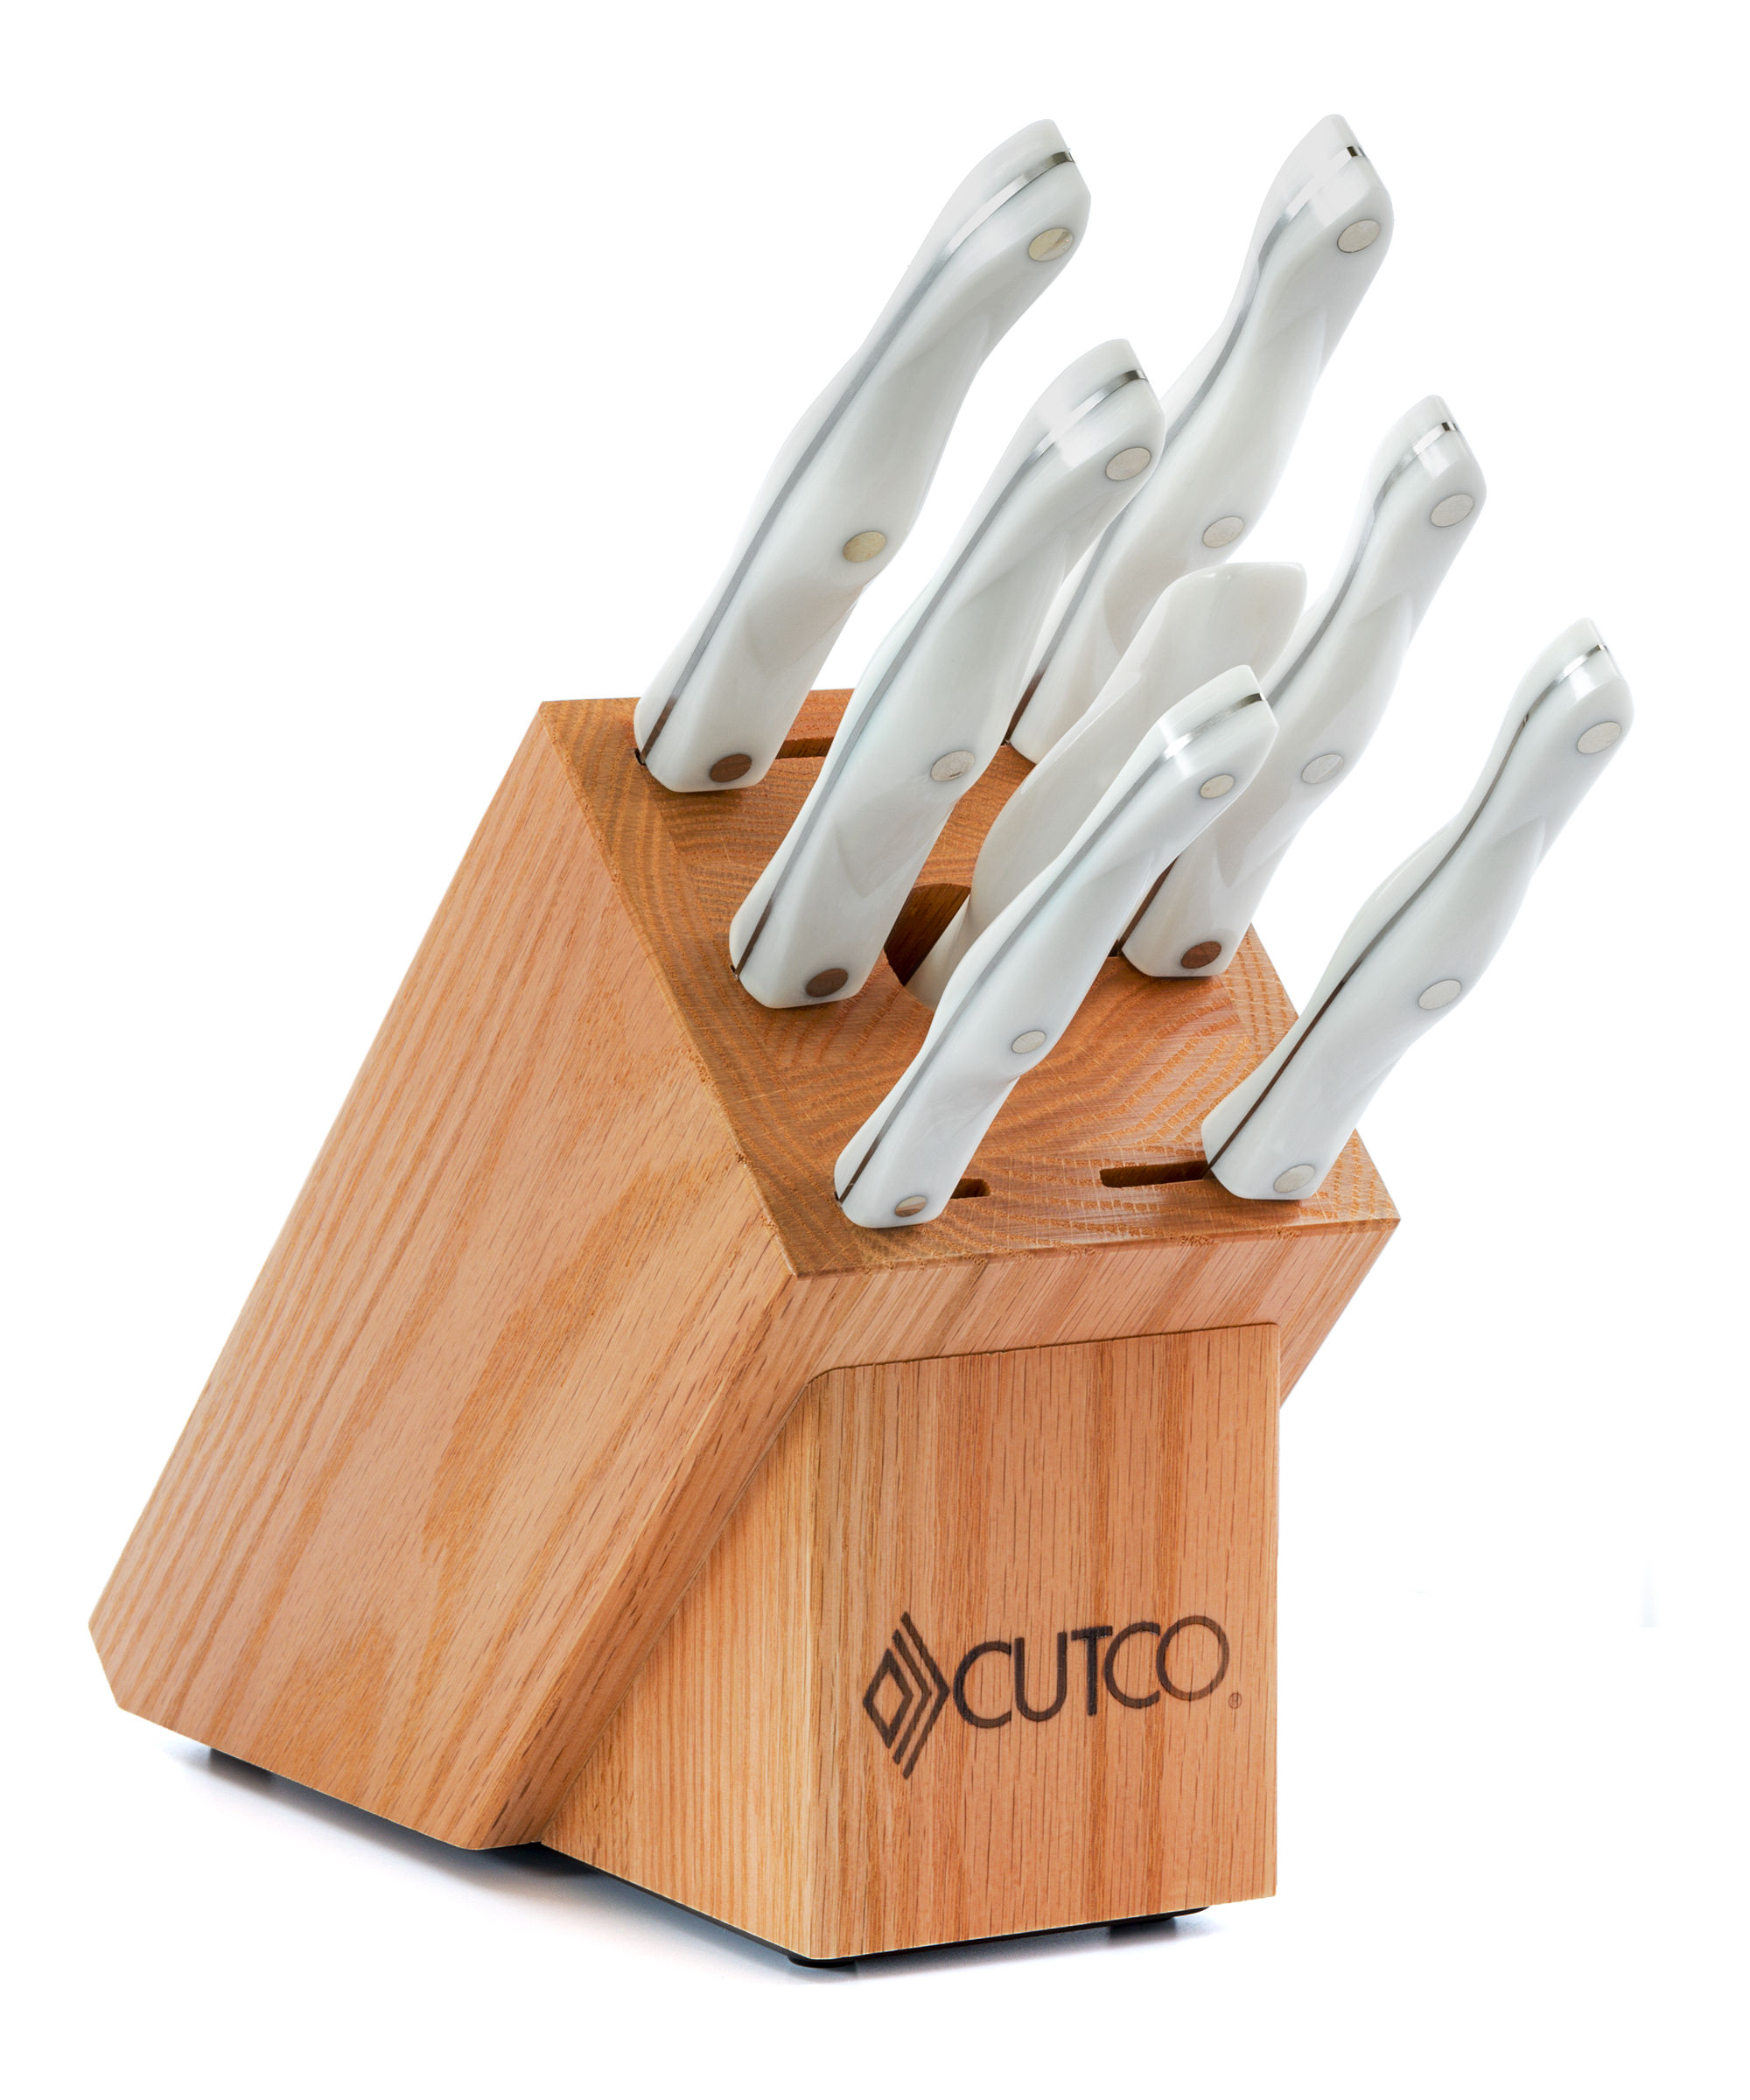 CUTCO Galley Knife Block Set 7 Slot Honey Oak - BLOCK ONLY - Made in the  USA